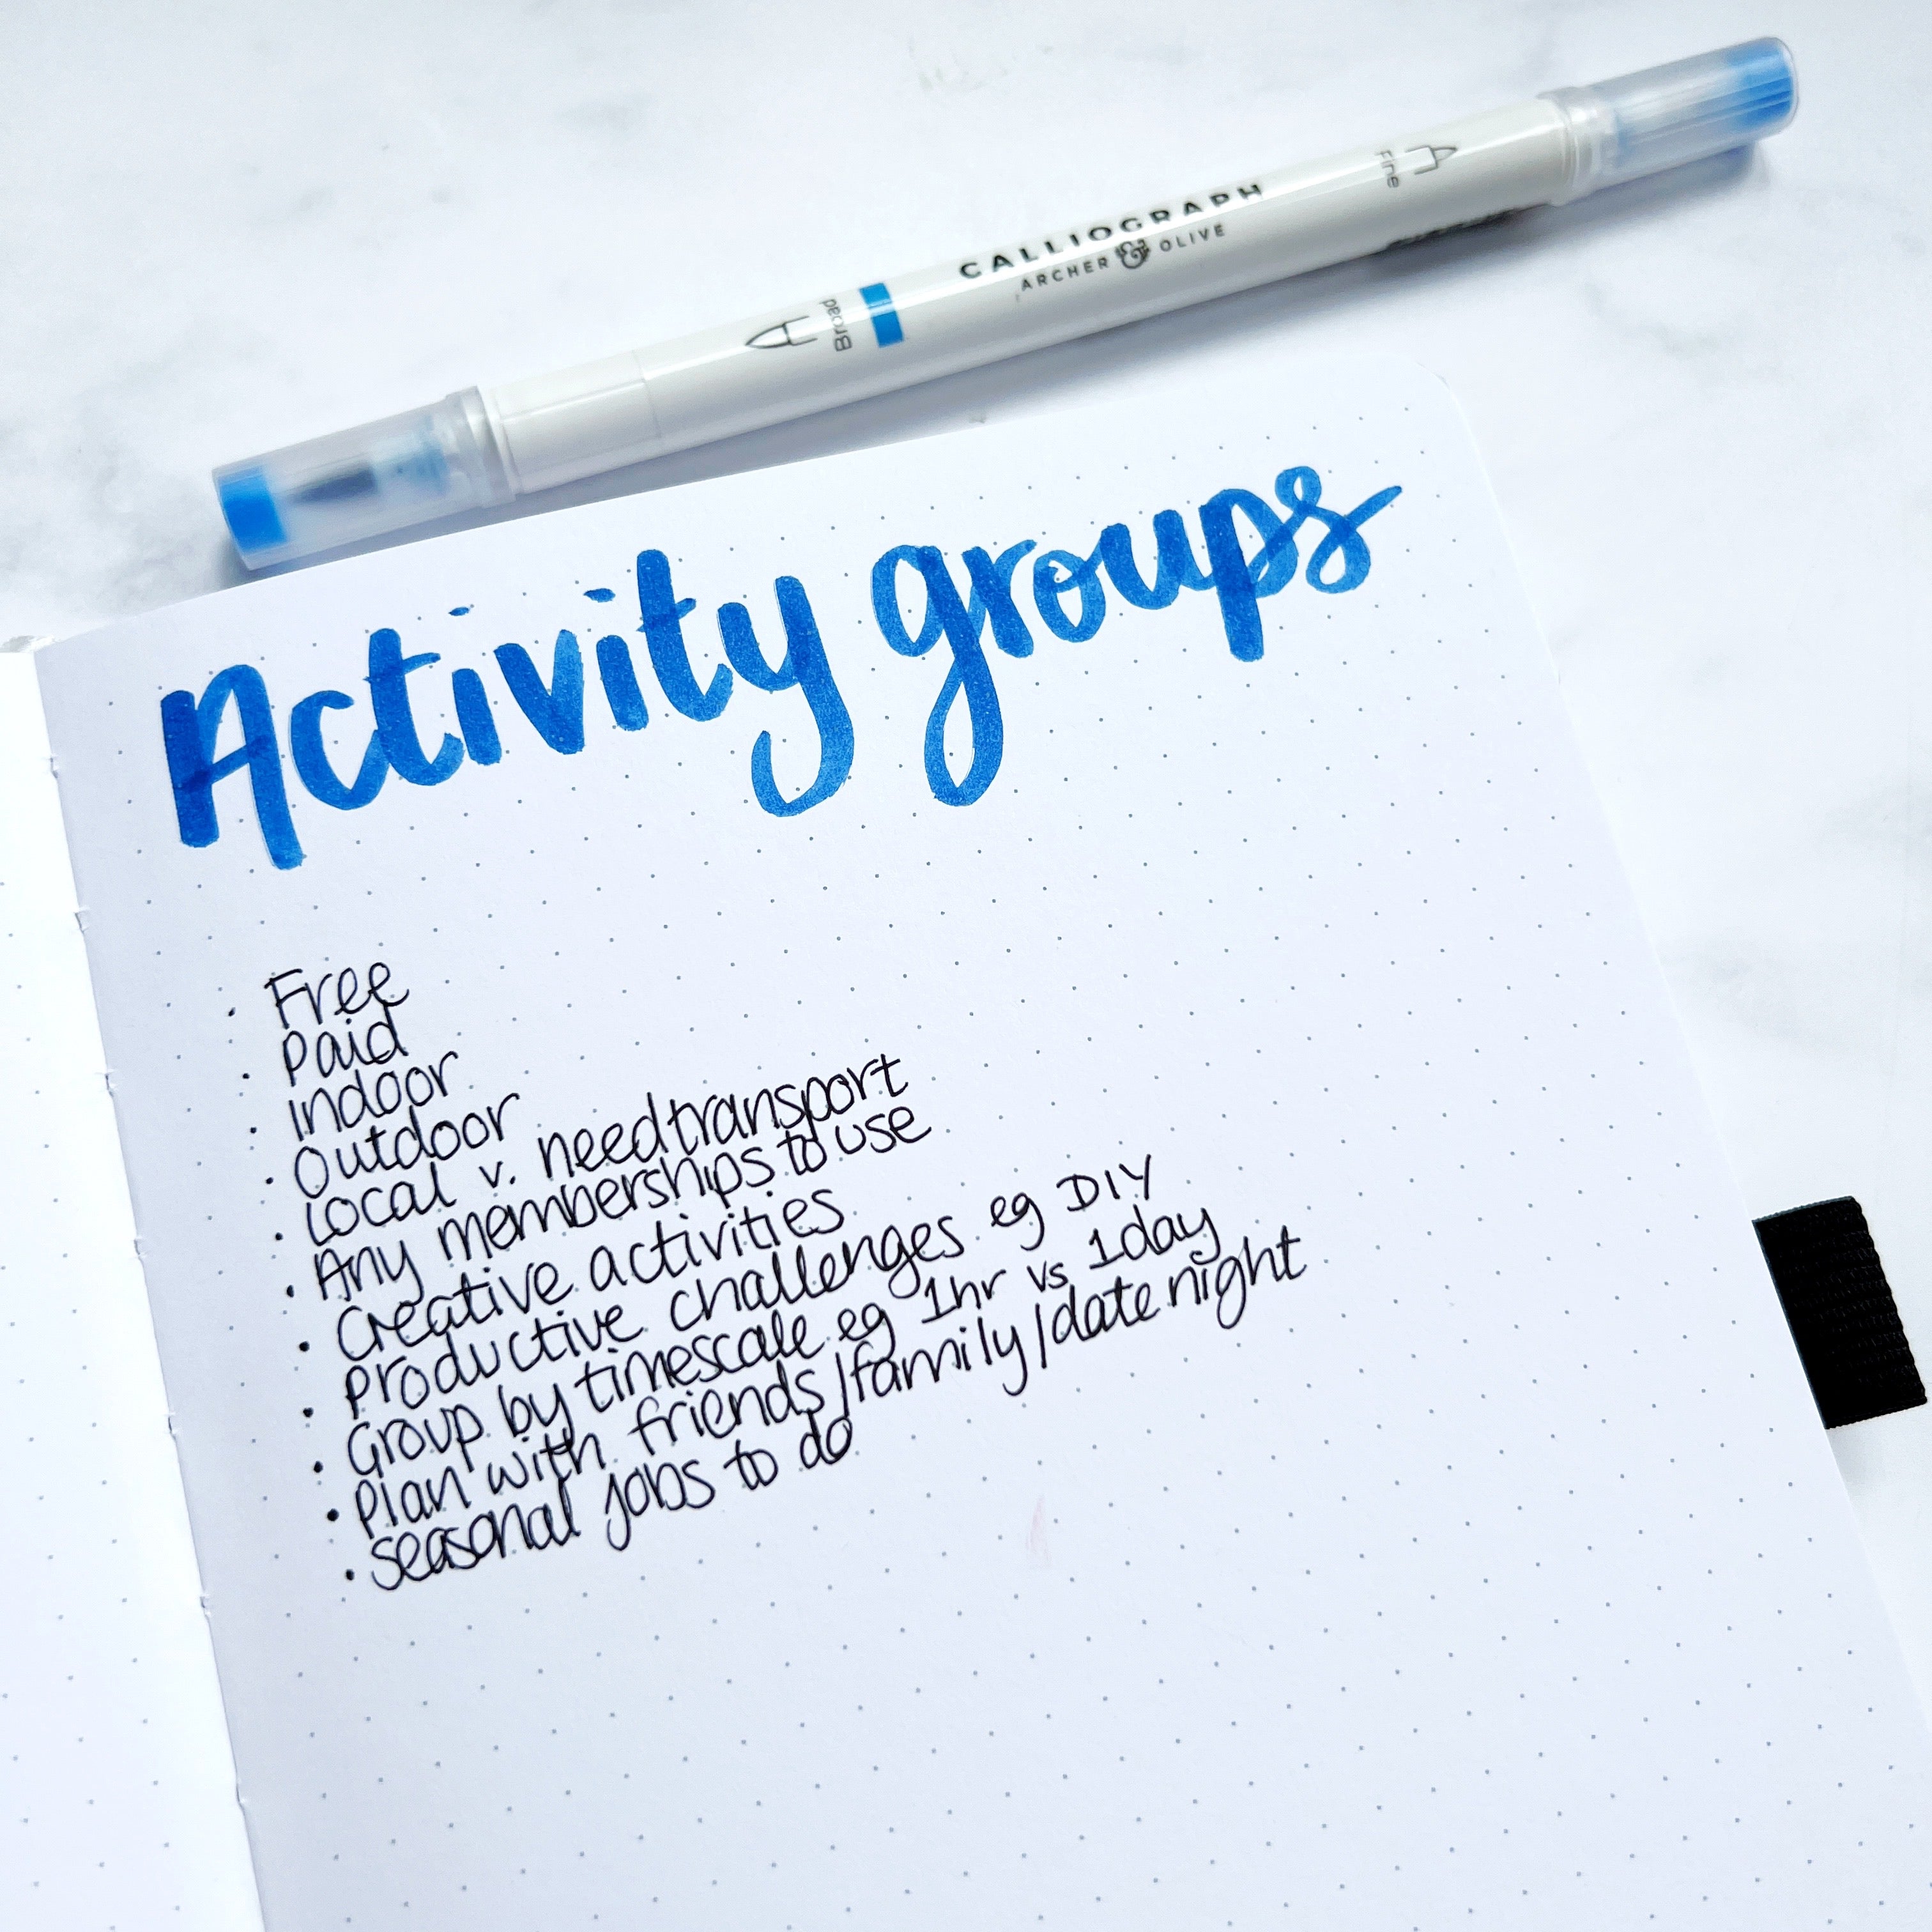 Open journal with list of activity categories